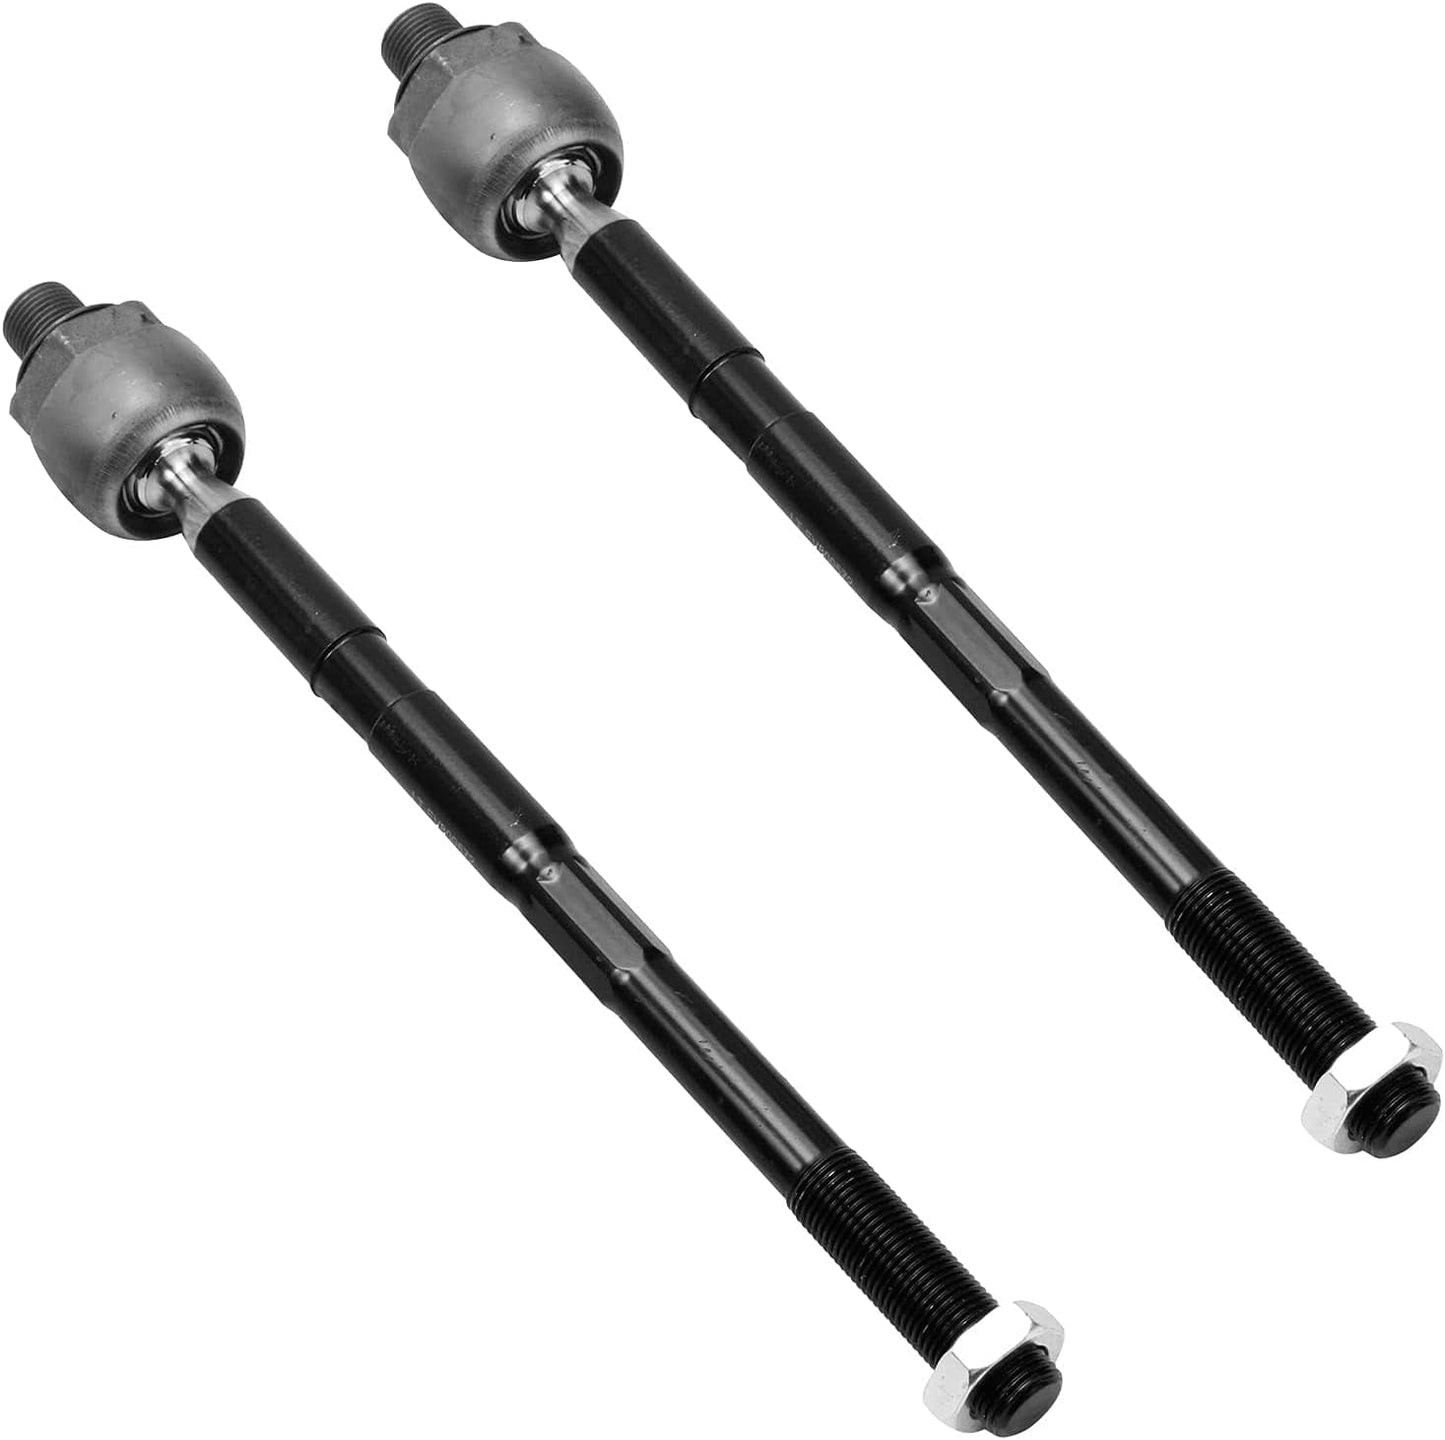 Detroit Axle - Front 6Pc Tie Rods Kit for Chevrolet Traverse Buick Enclave GMC Acadia Limited Saturn Outlook, 4 Suspension Outer & Inner Tie Rod Ends 2 Sway Bar Links Replacement